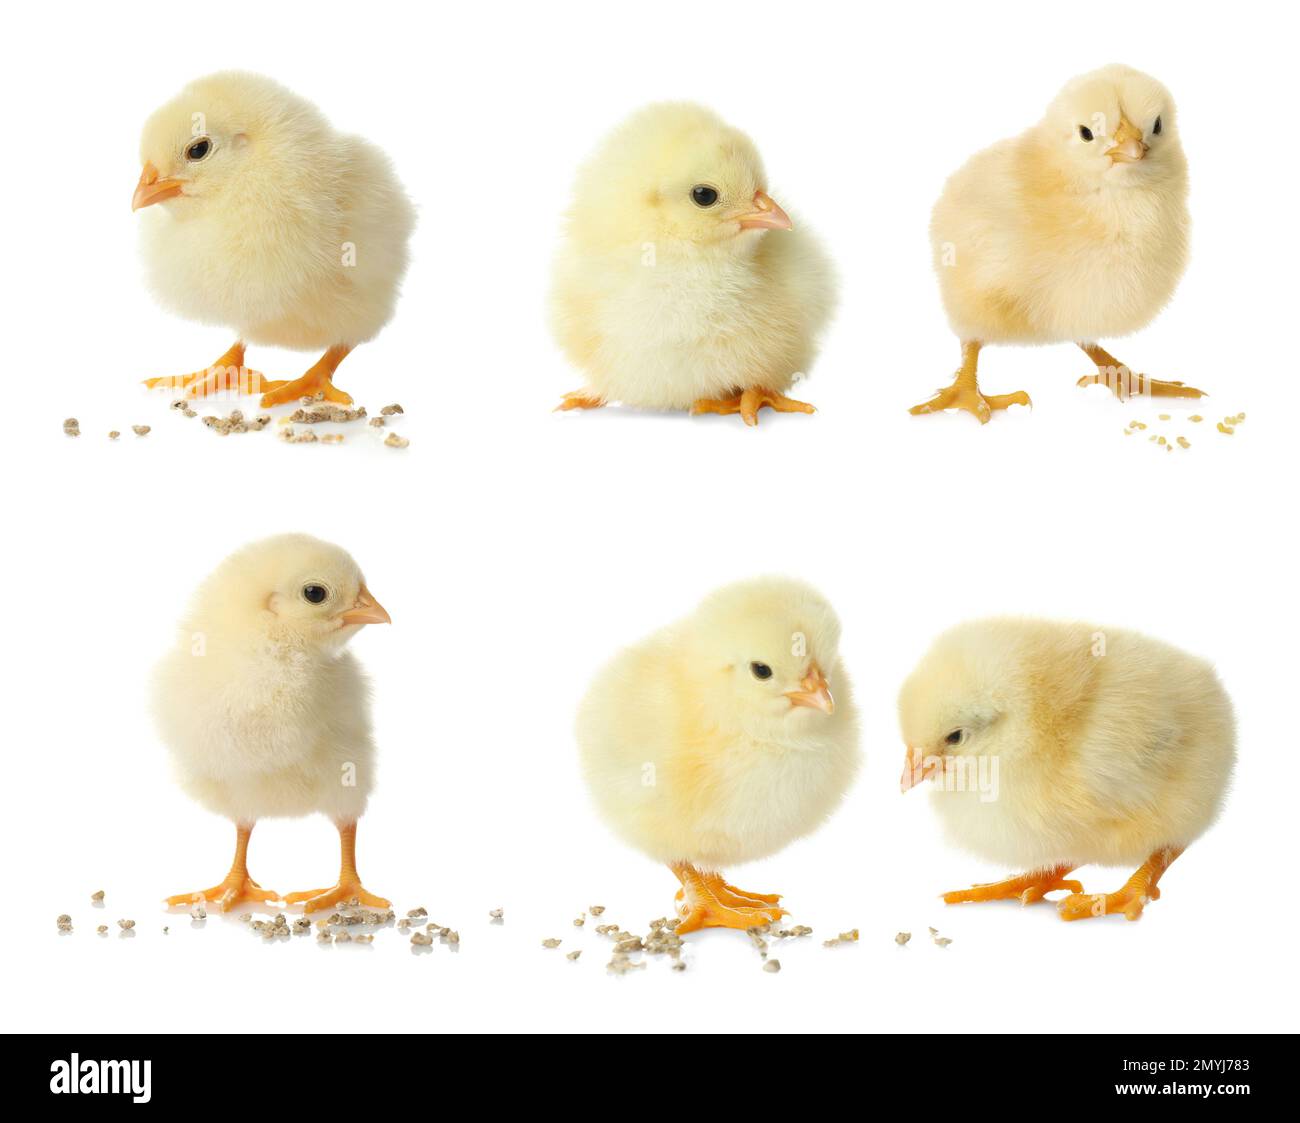 Collage with cute fluffy chickens on white background. Farm animals Stock Photo